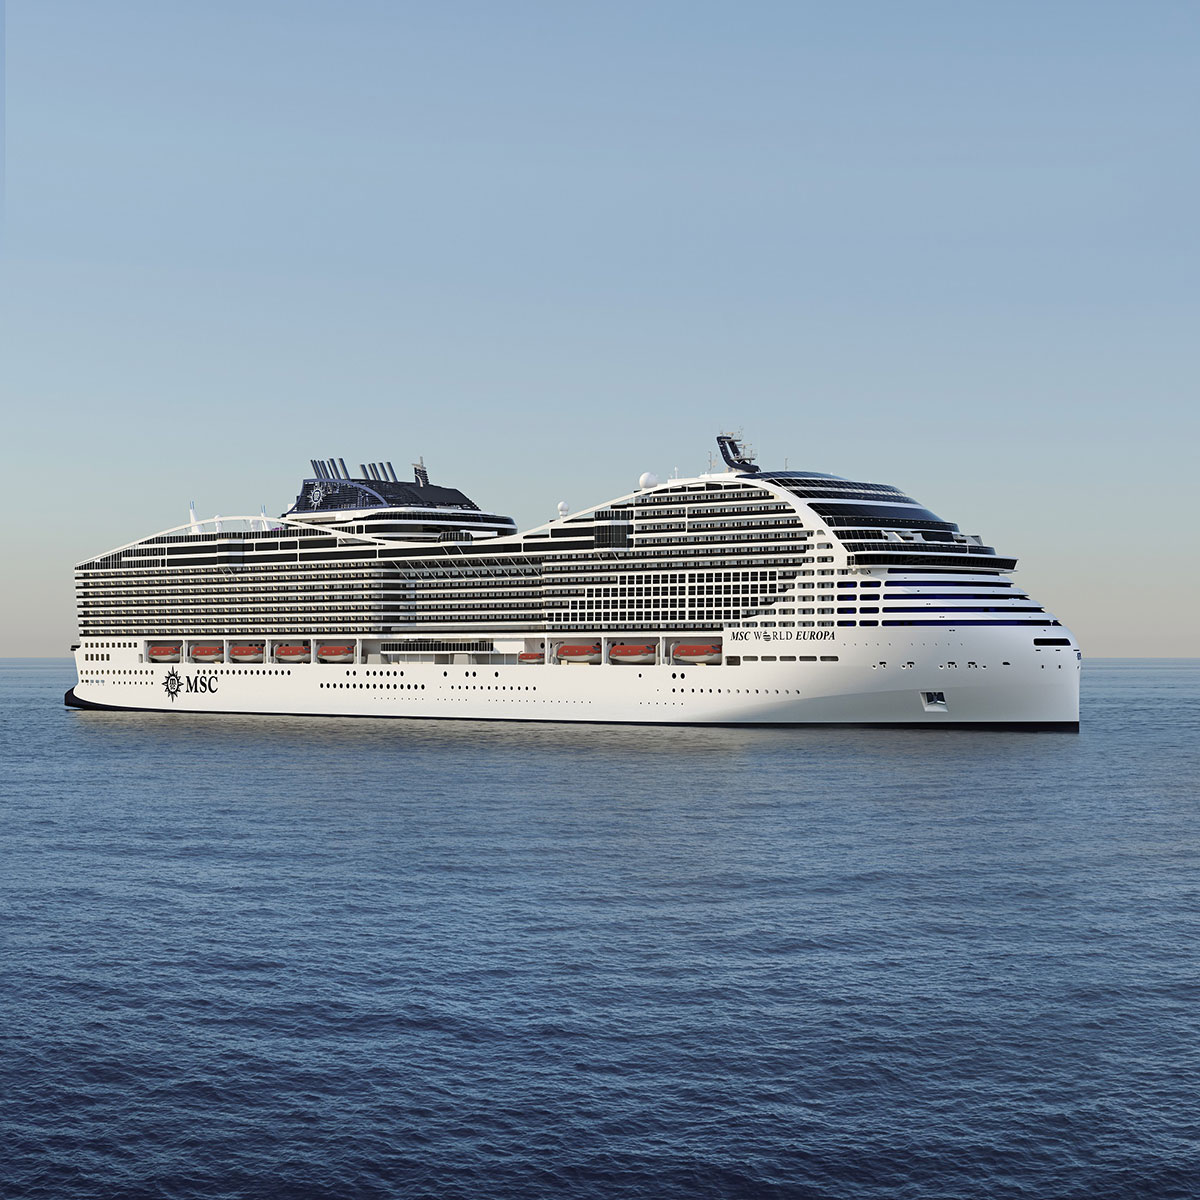 MSC Cruises unveils the entertainment show on board the new flagship ship MSC World Europa